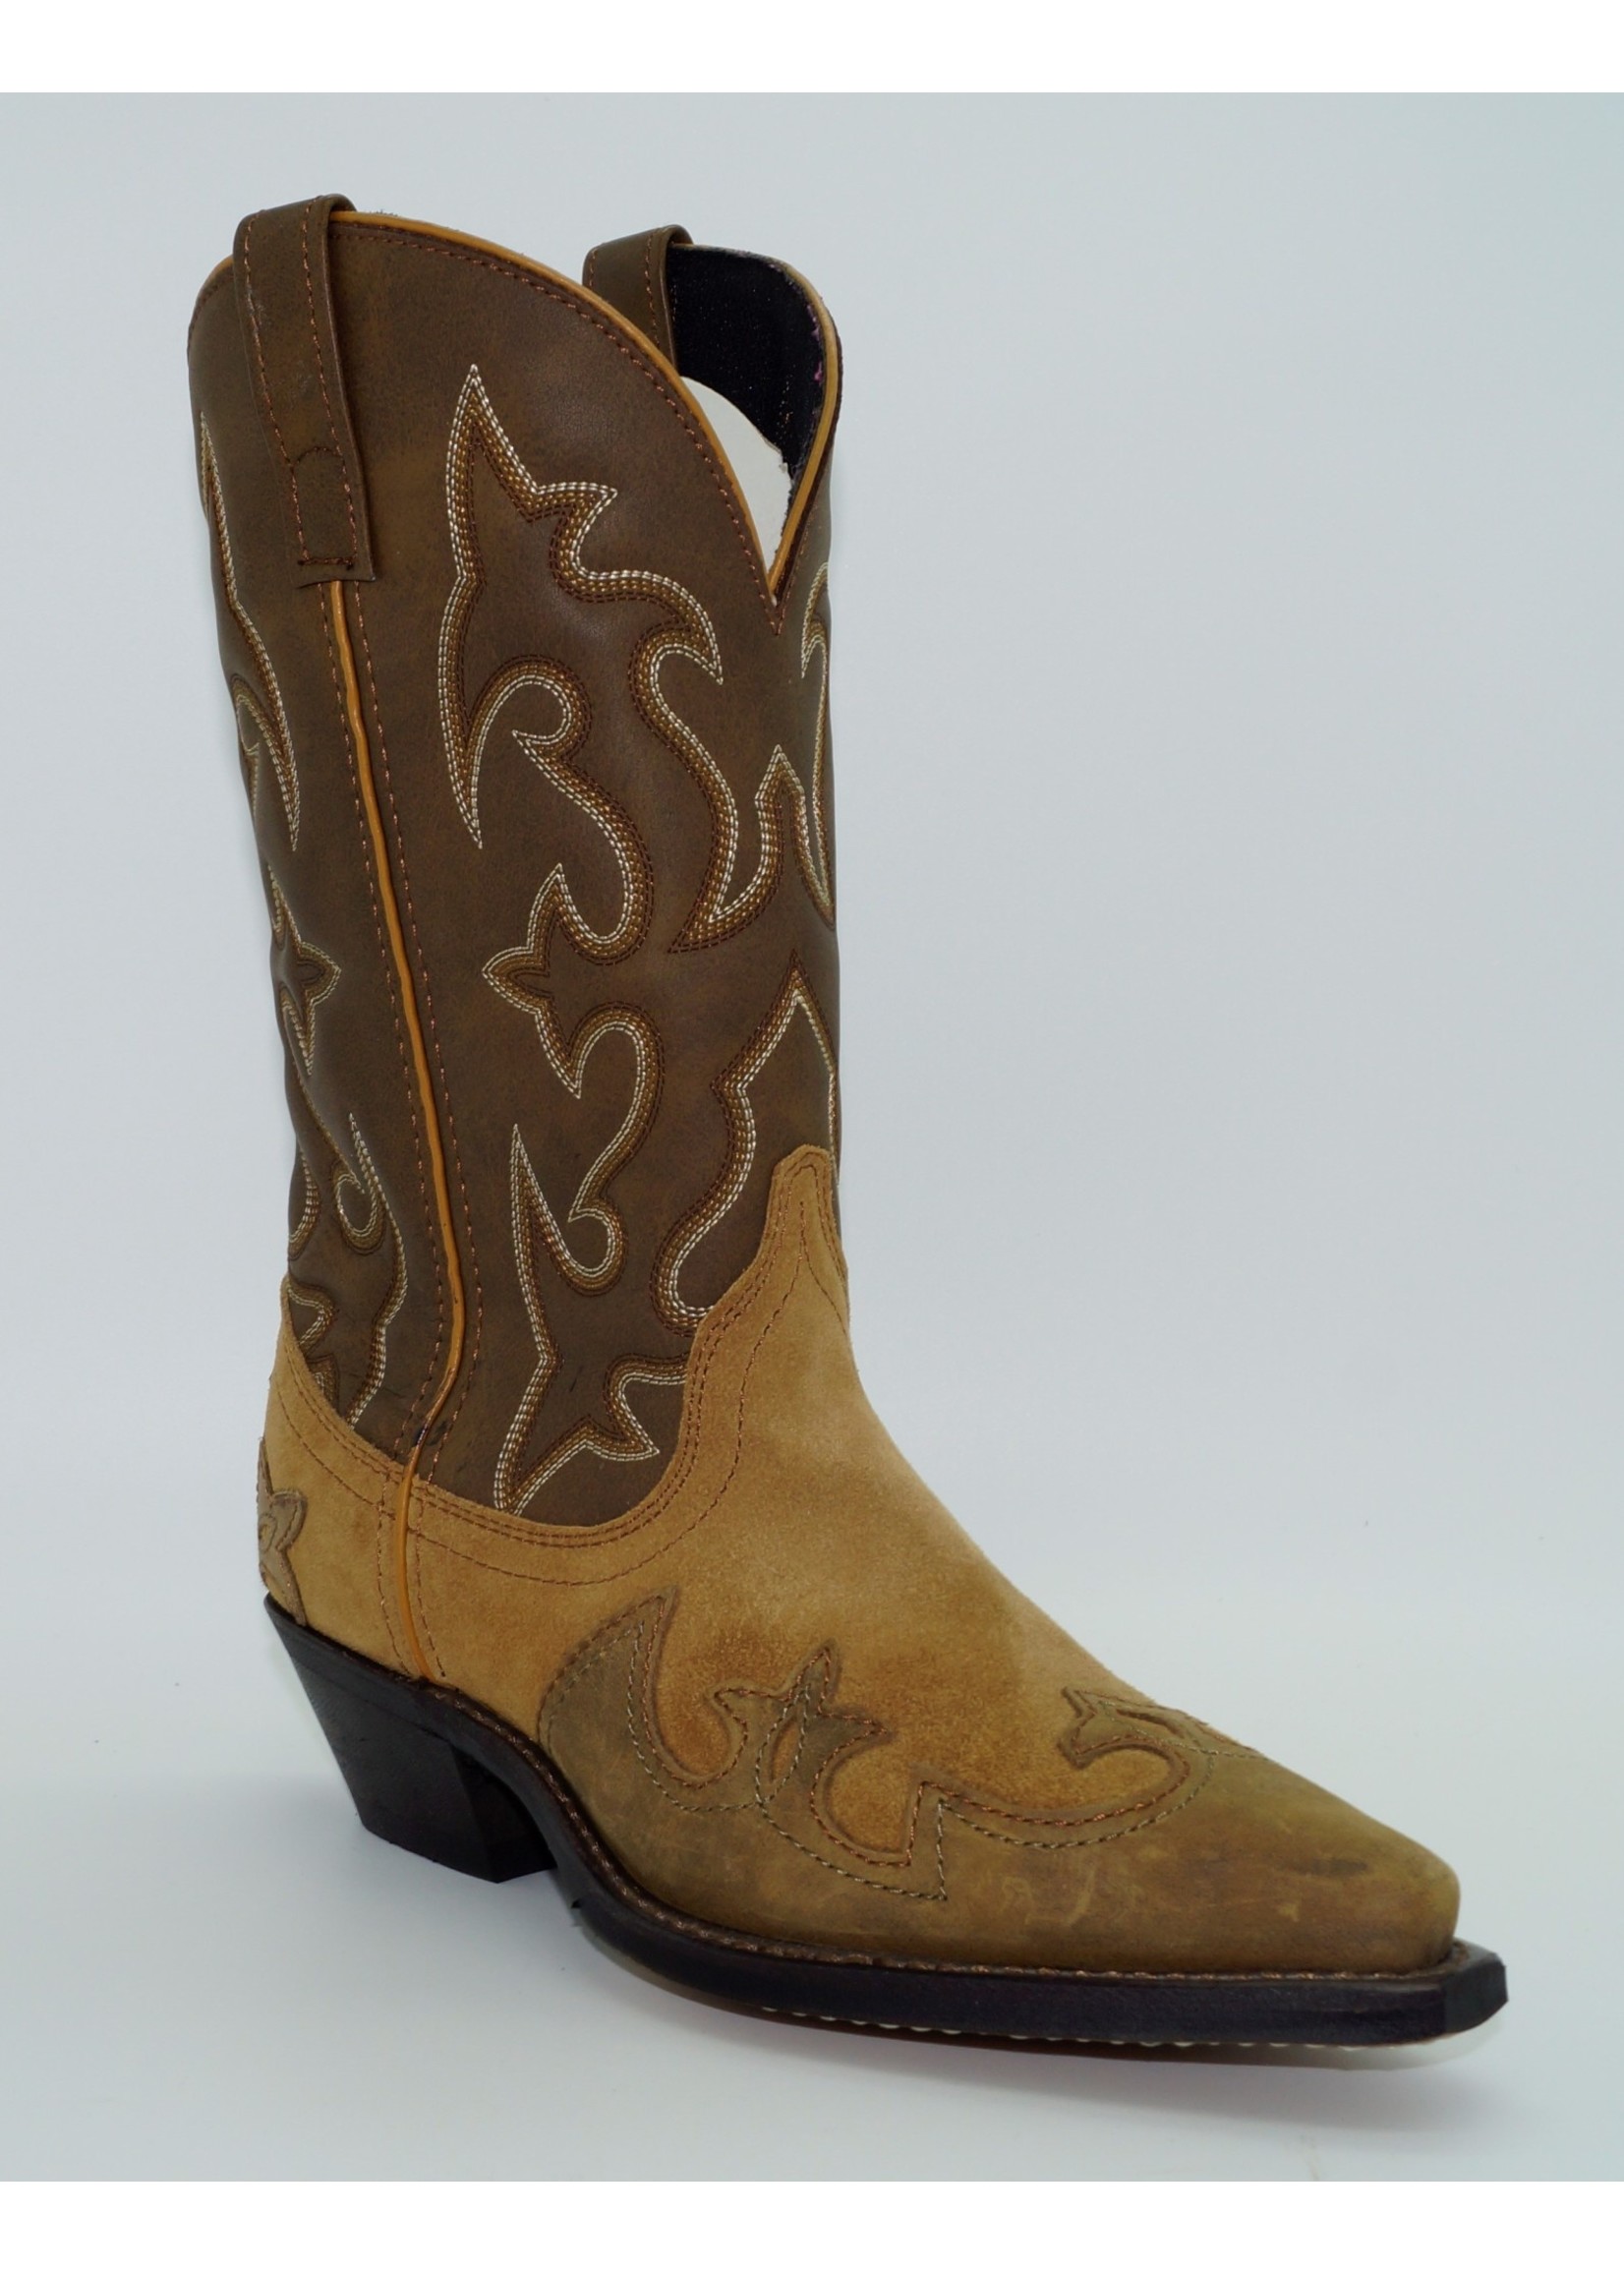 Laredo Women's Suede with Inlay Western Boot 5412